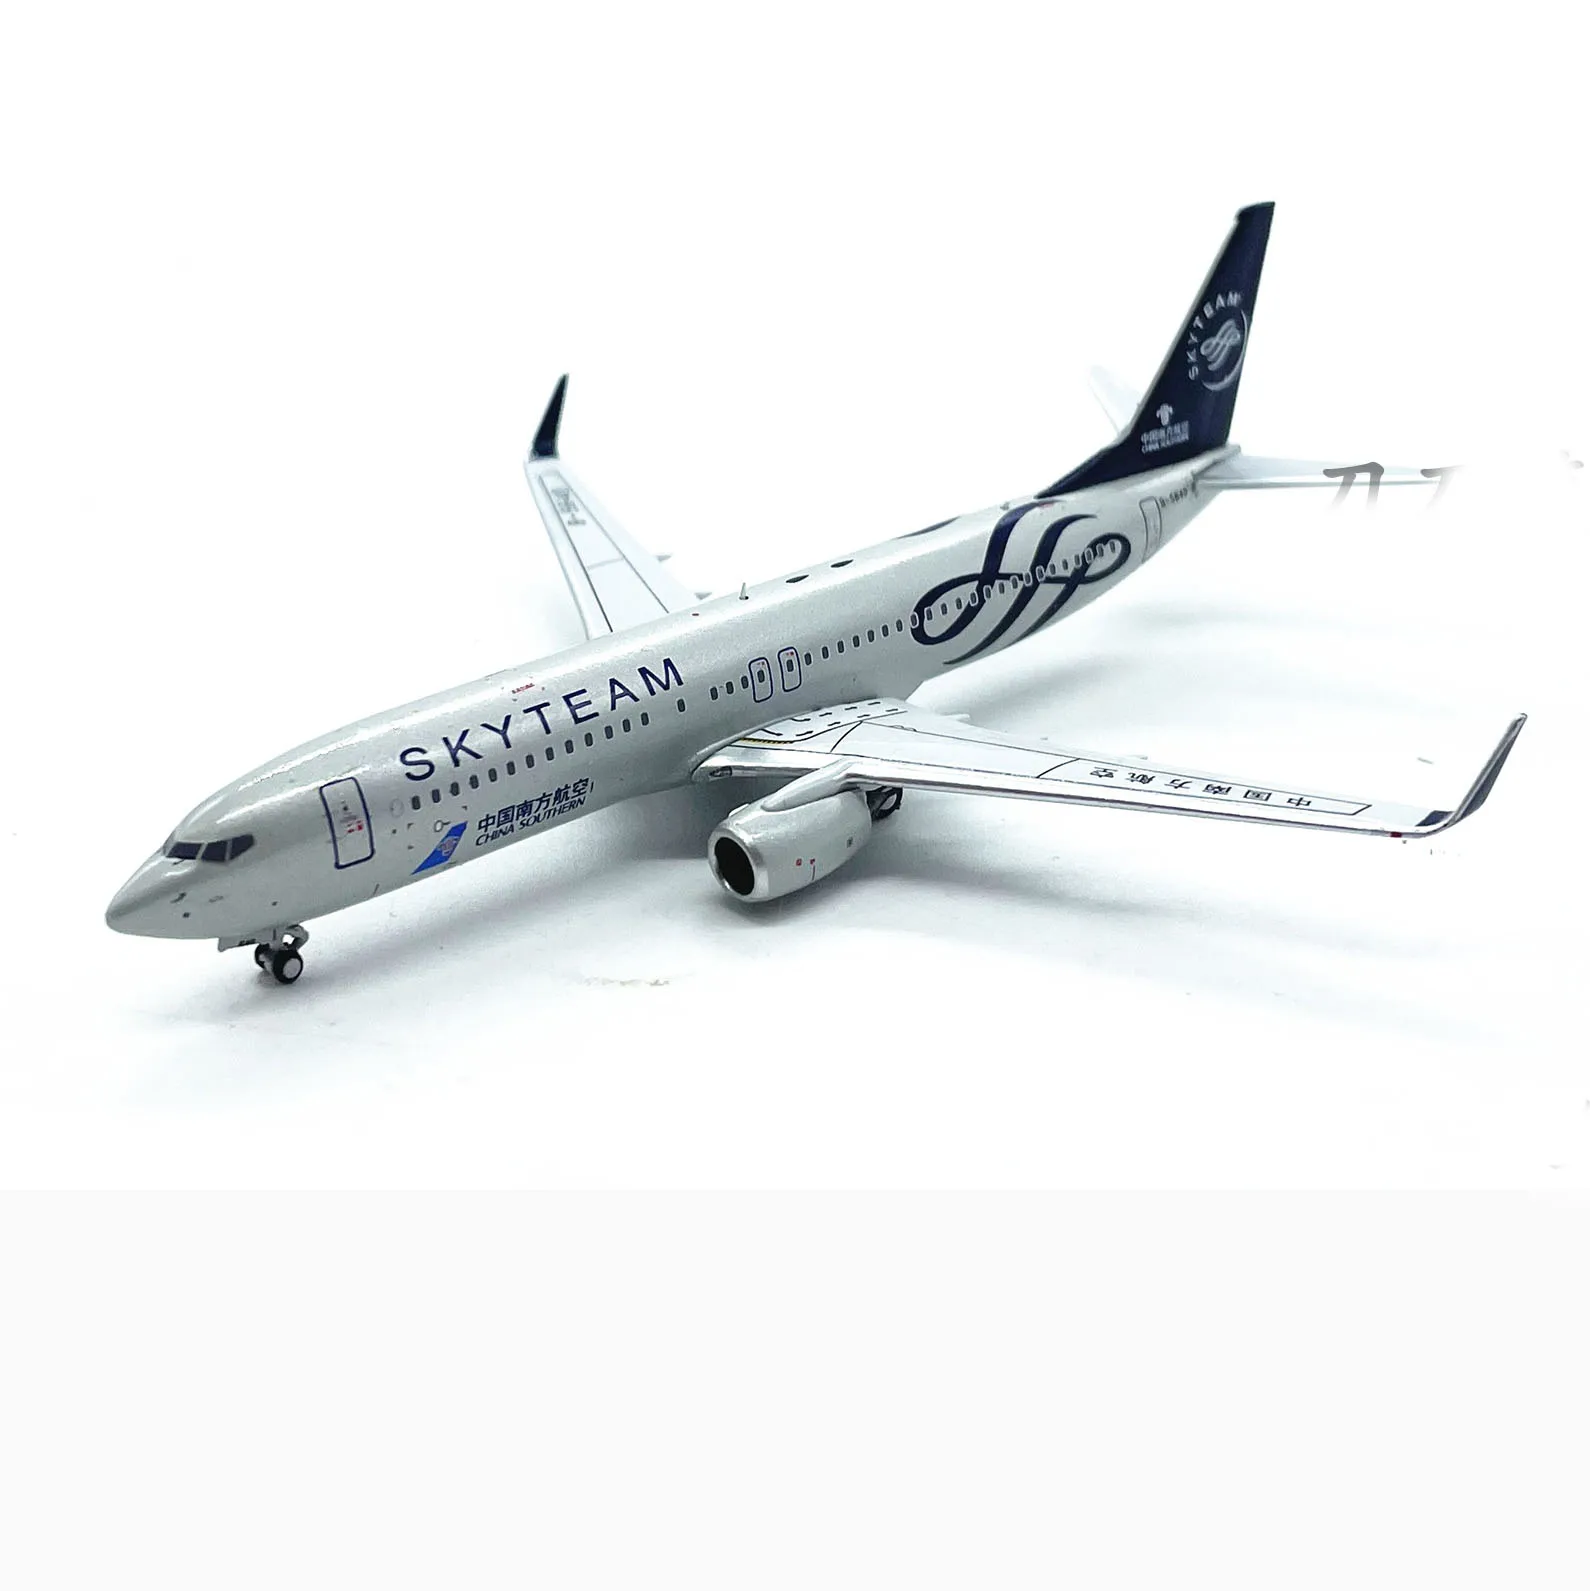 

1:400 Scale Southern Airlines Passenger Aircraft B737-800 Alloy B-5640 SkyTeam Passenger Aircraft Model Collection Gift